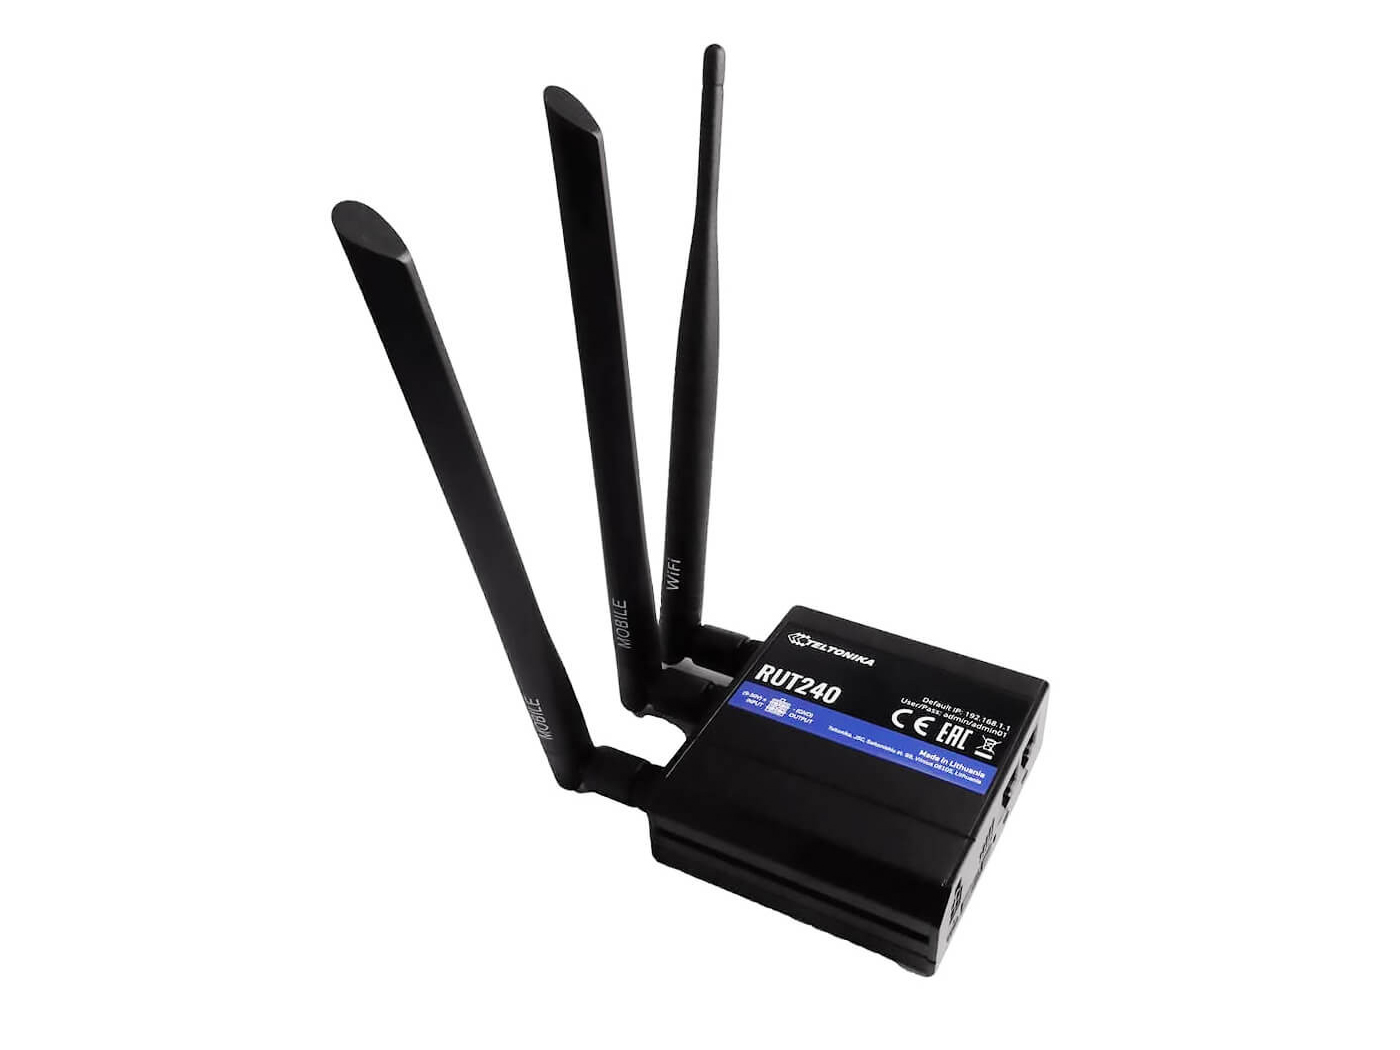 M2M-RUT240 Compact 4G /LTE and WiFi Cellular Router by ICRealtime